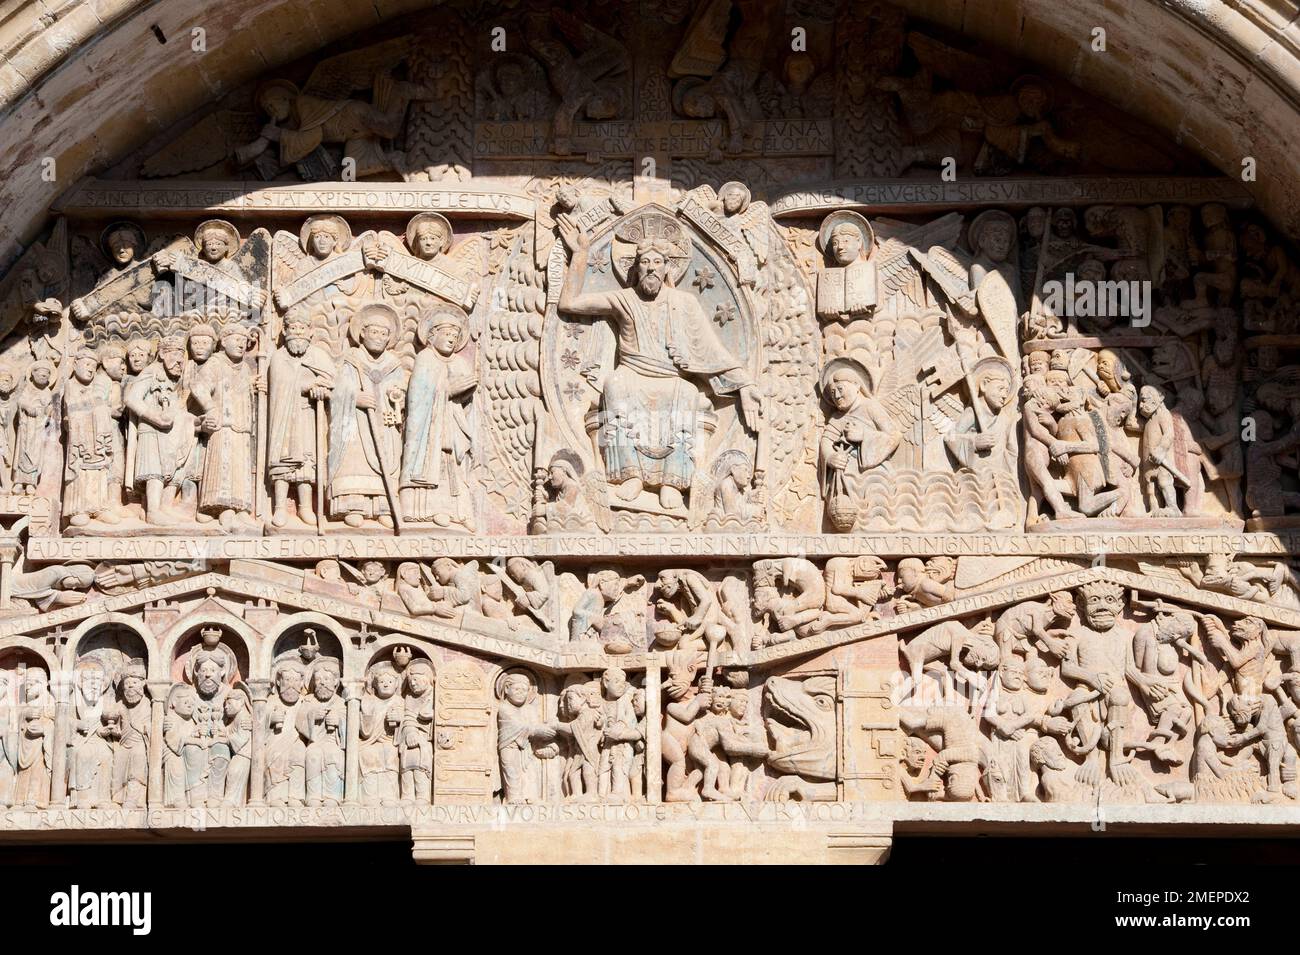 France, Midi-Pyrenees, Aveyron, Conques, Abbey Church of Saint Foy, religious relief carvings on the tympanum above entrance Stock Photo